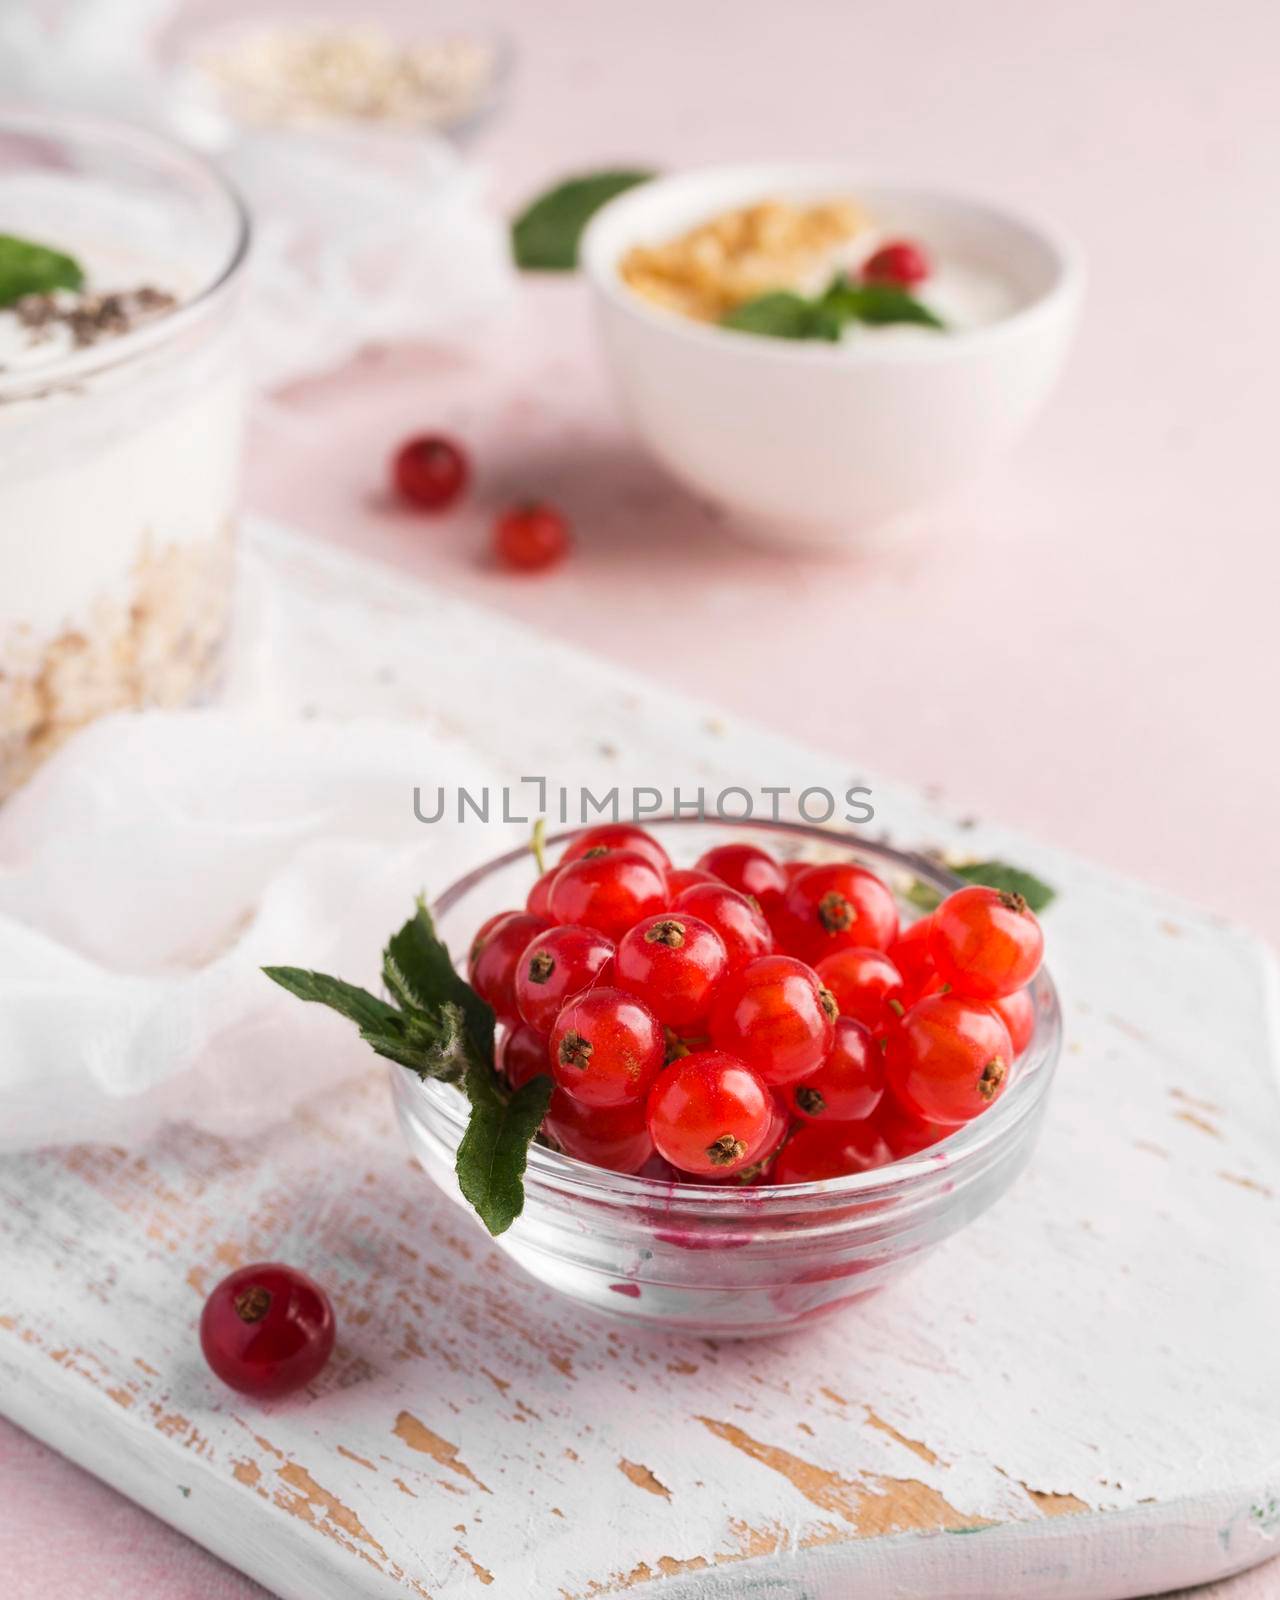 cranberries small bowl bio food lifestyle concept. High quality photo by Zahard